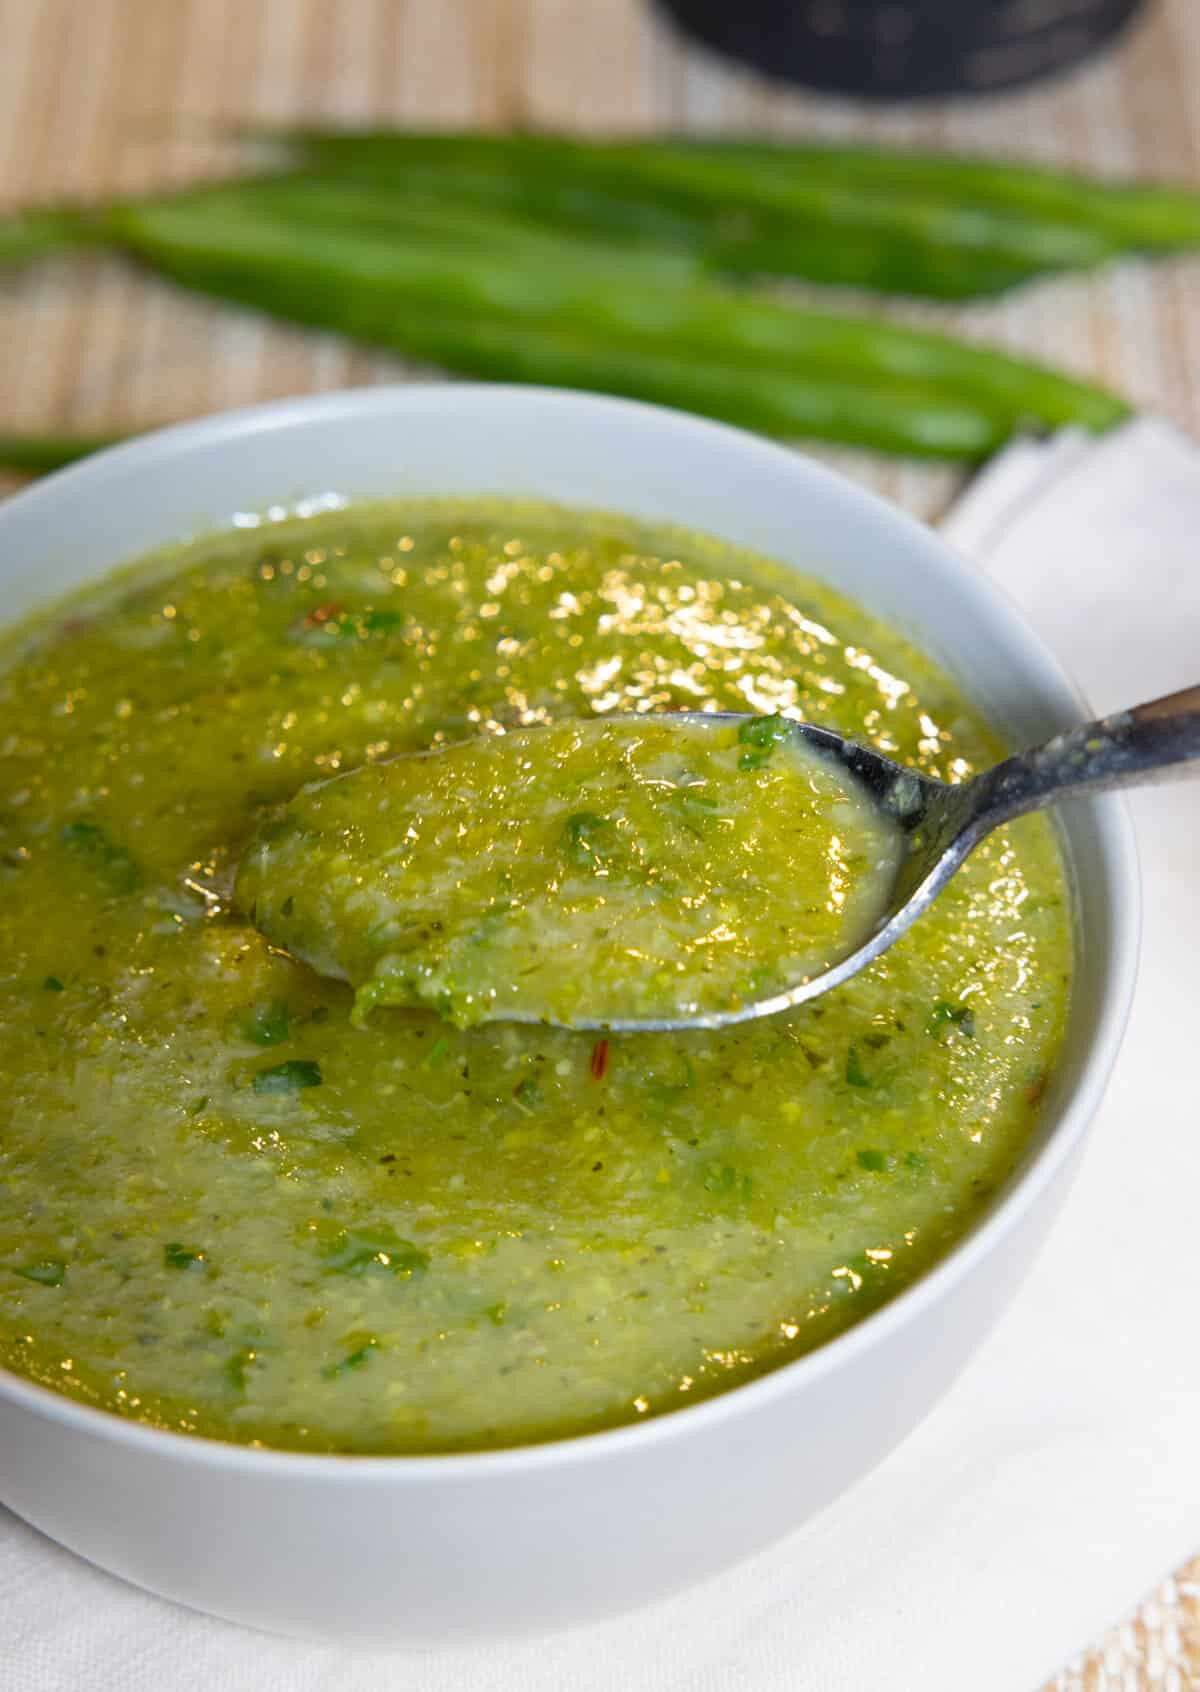 Try this simple green soup made with zucchini, green beans, celery, fresh herbs, and spices that’s designed for easy digestion and detox. (Courtesy of Buttered Veg)